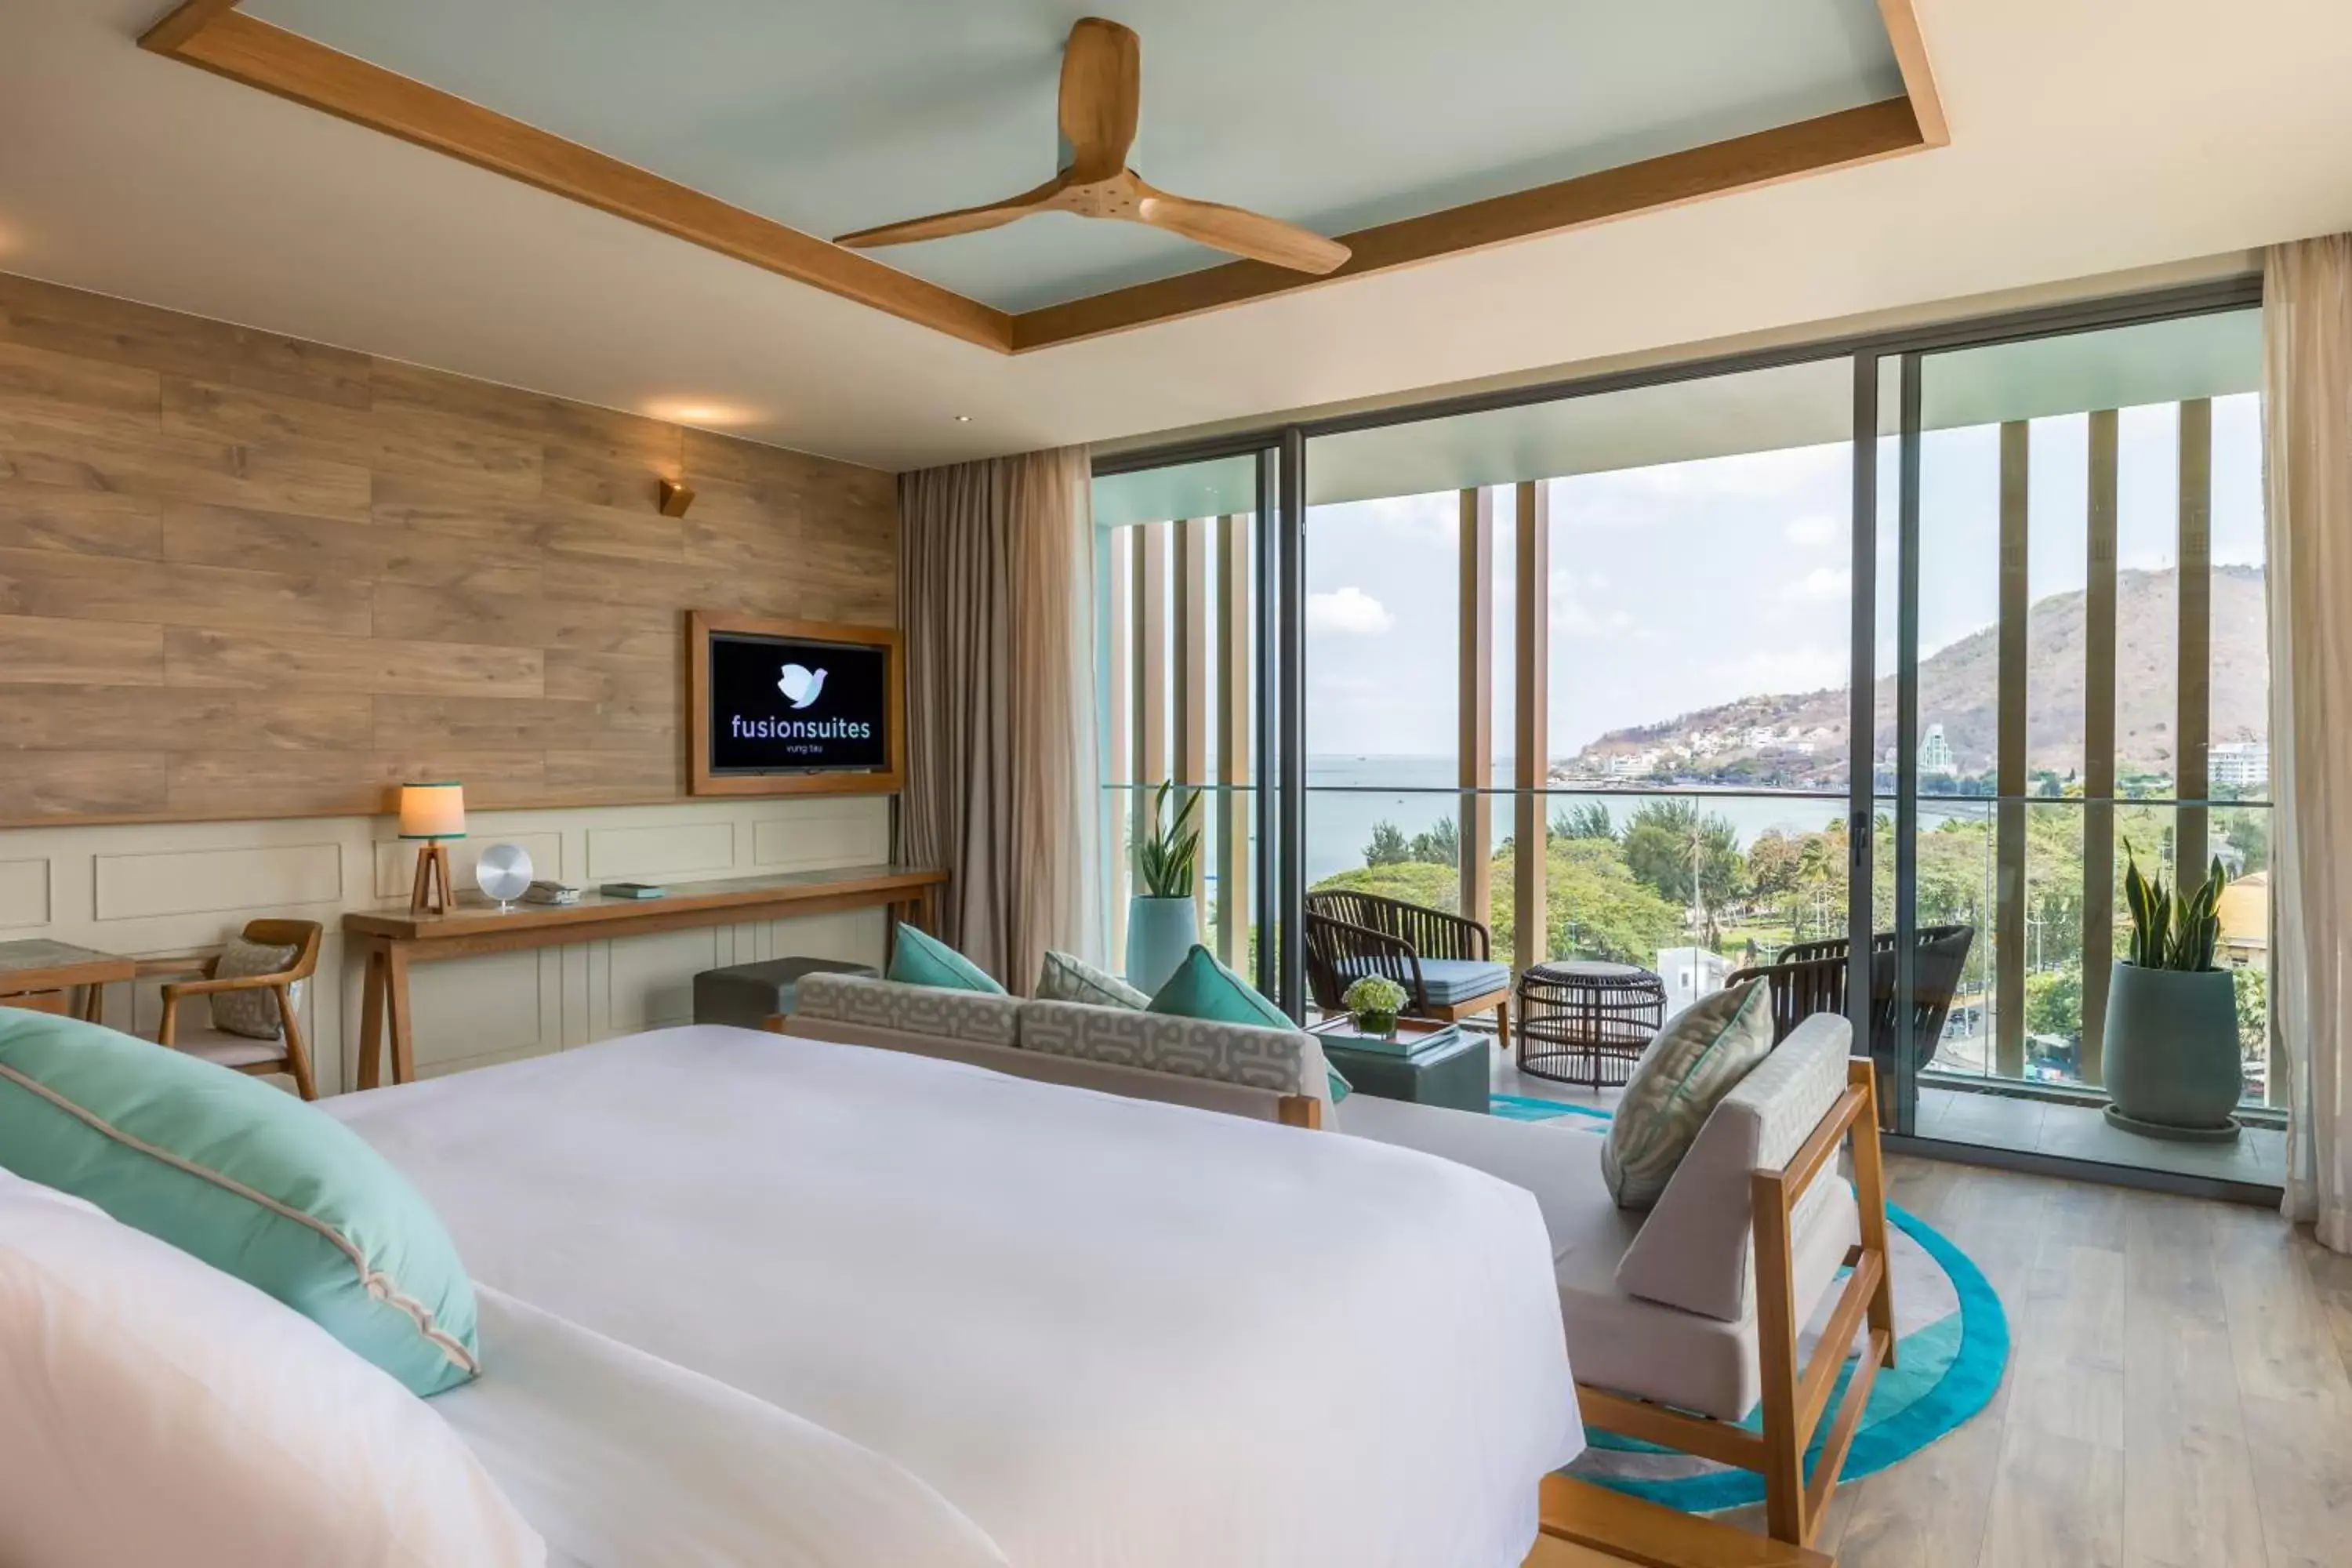 Bedroom in Fusion Suites Vung Tau